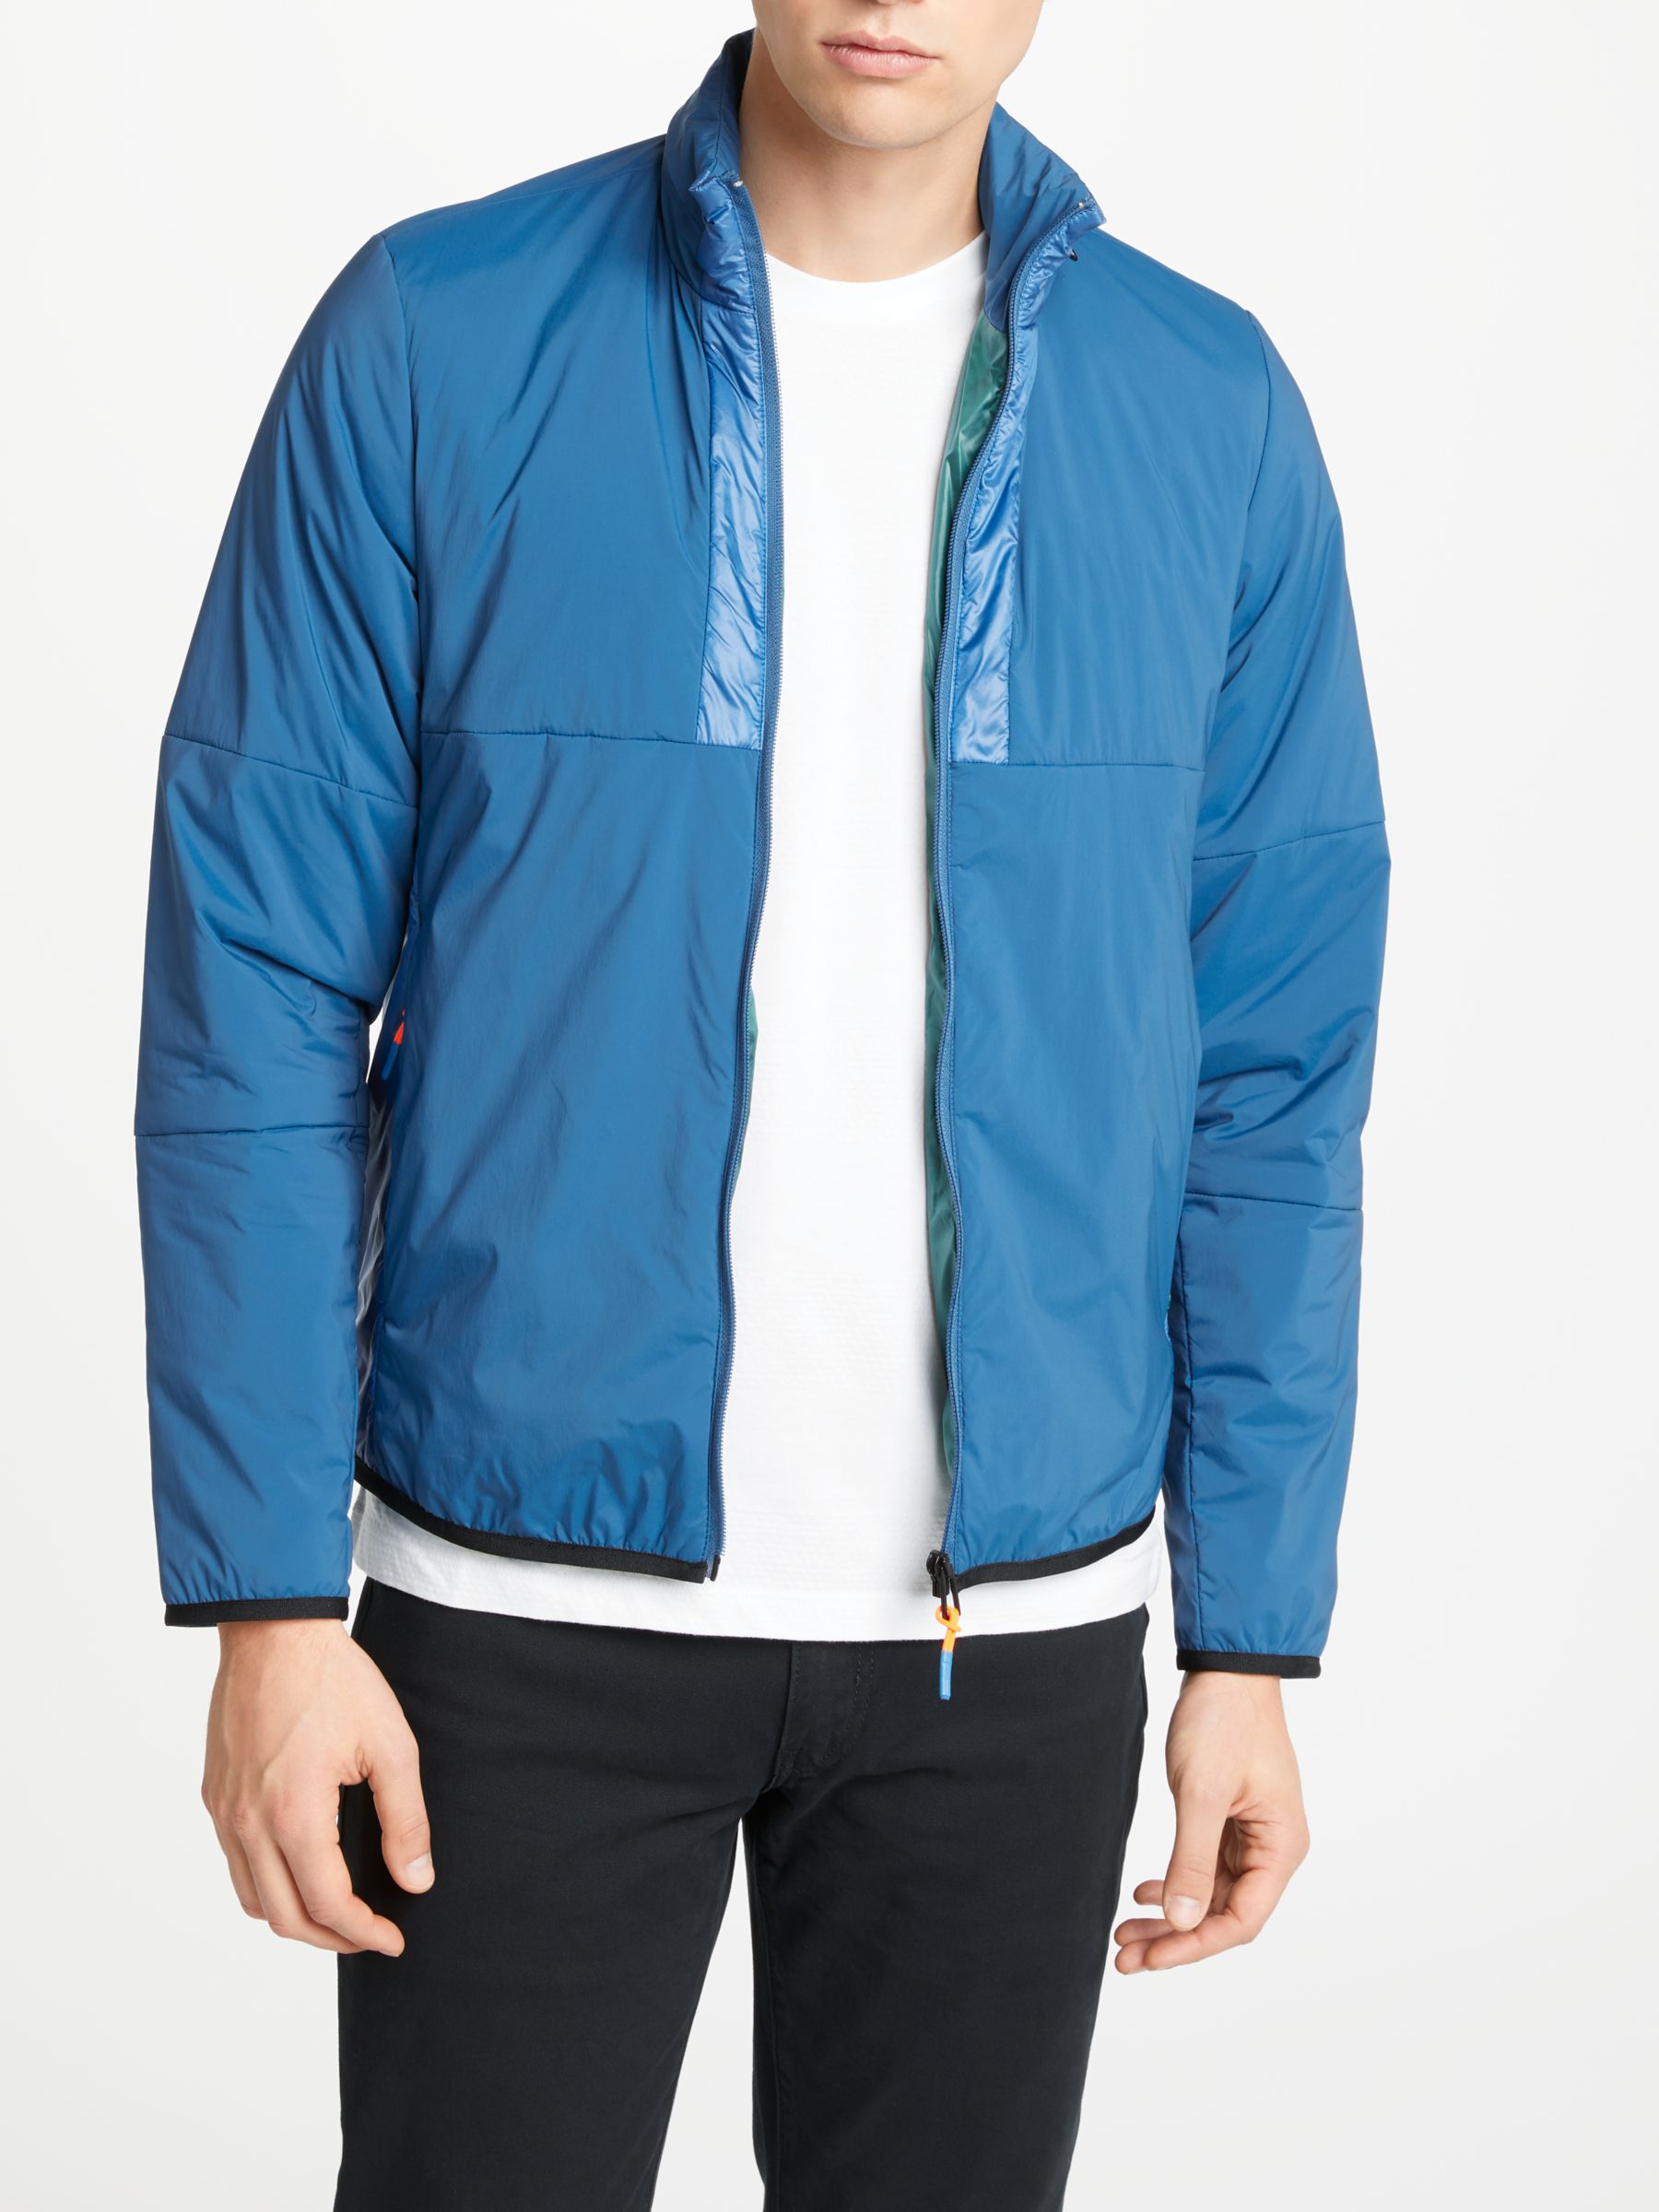 john lewis mens quilted jackets